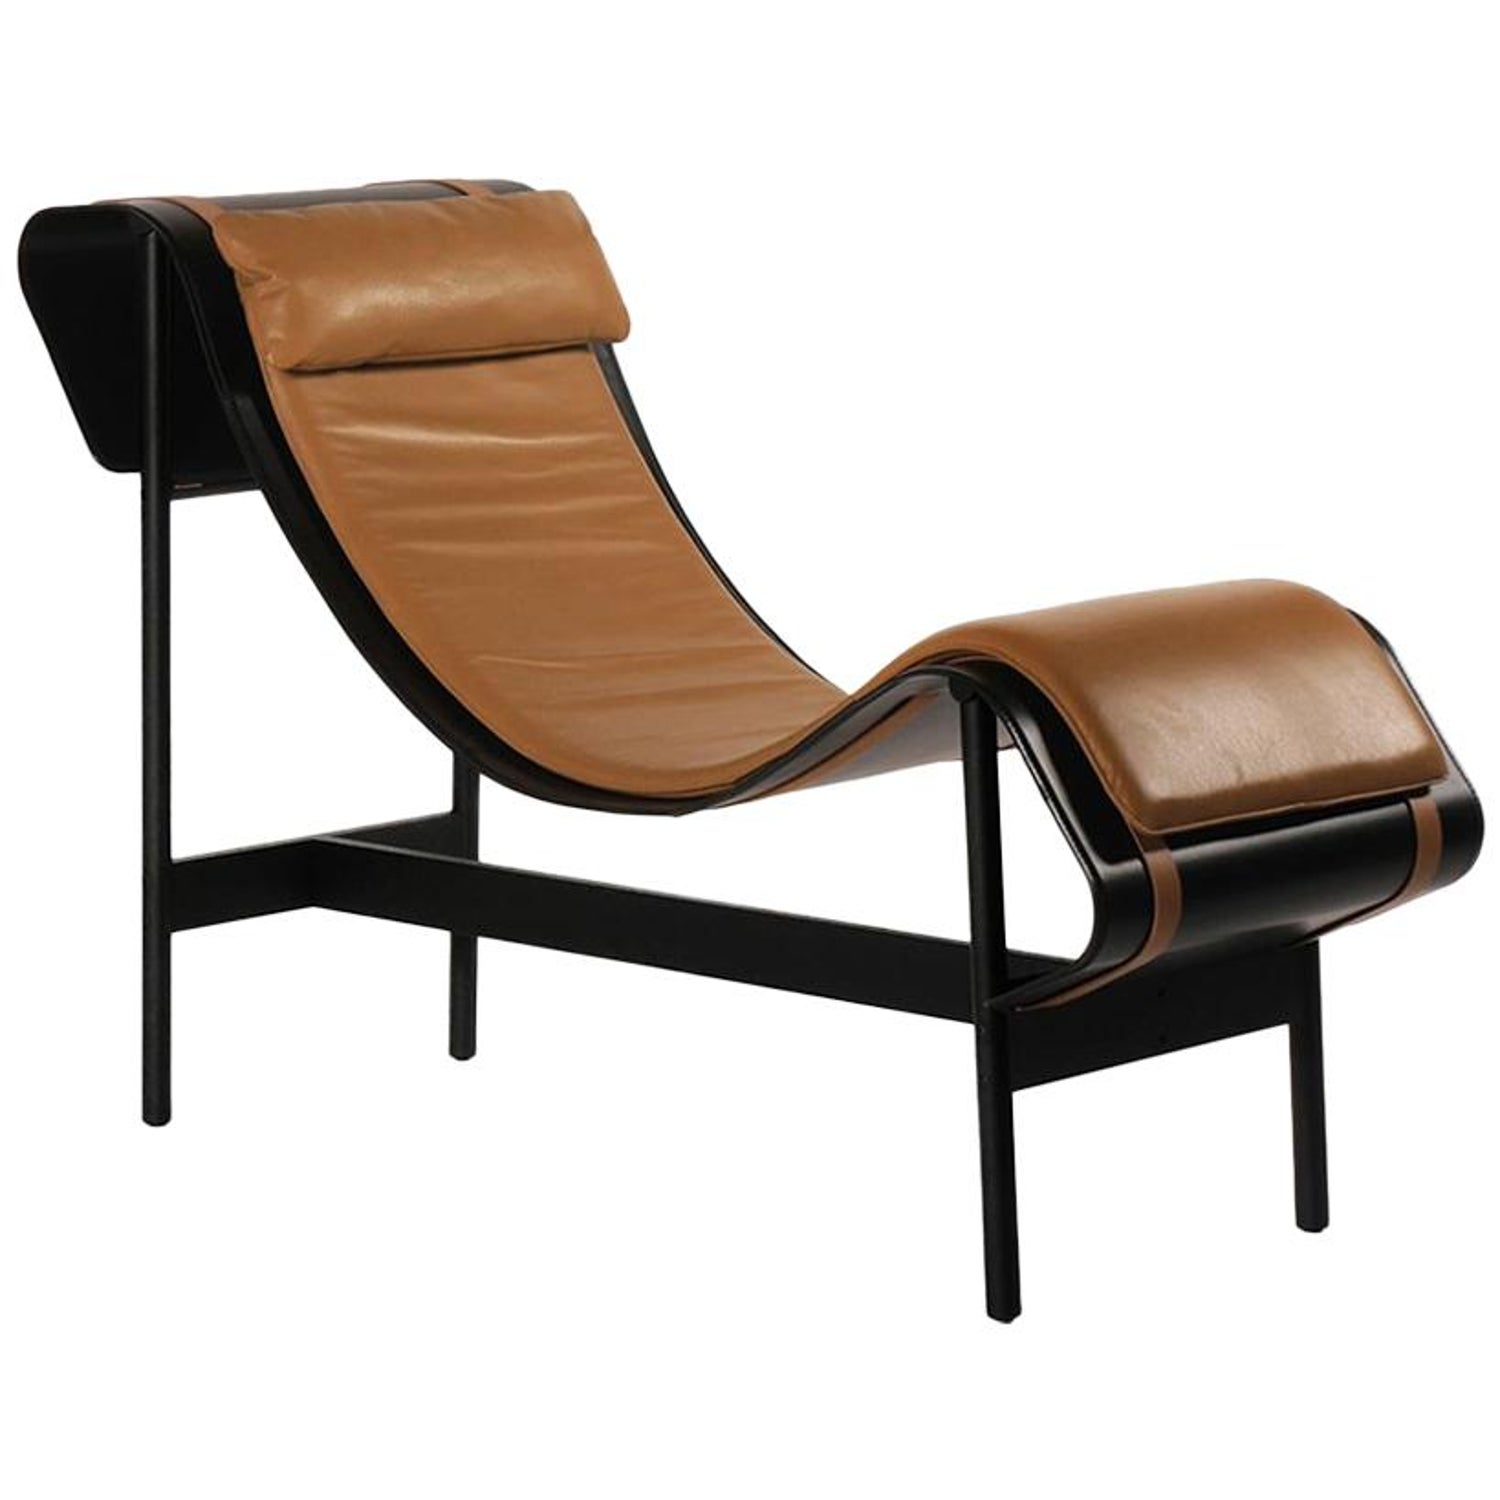 Curved Leather Platform and Cushion Chaise Longue For Sale at 1stDibs